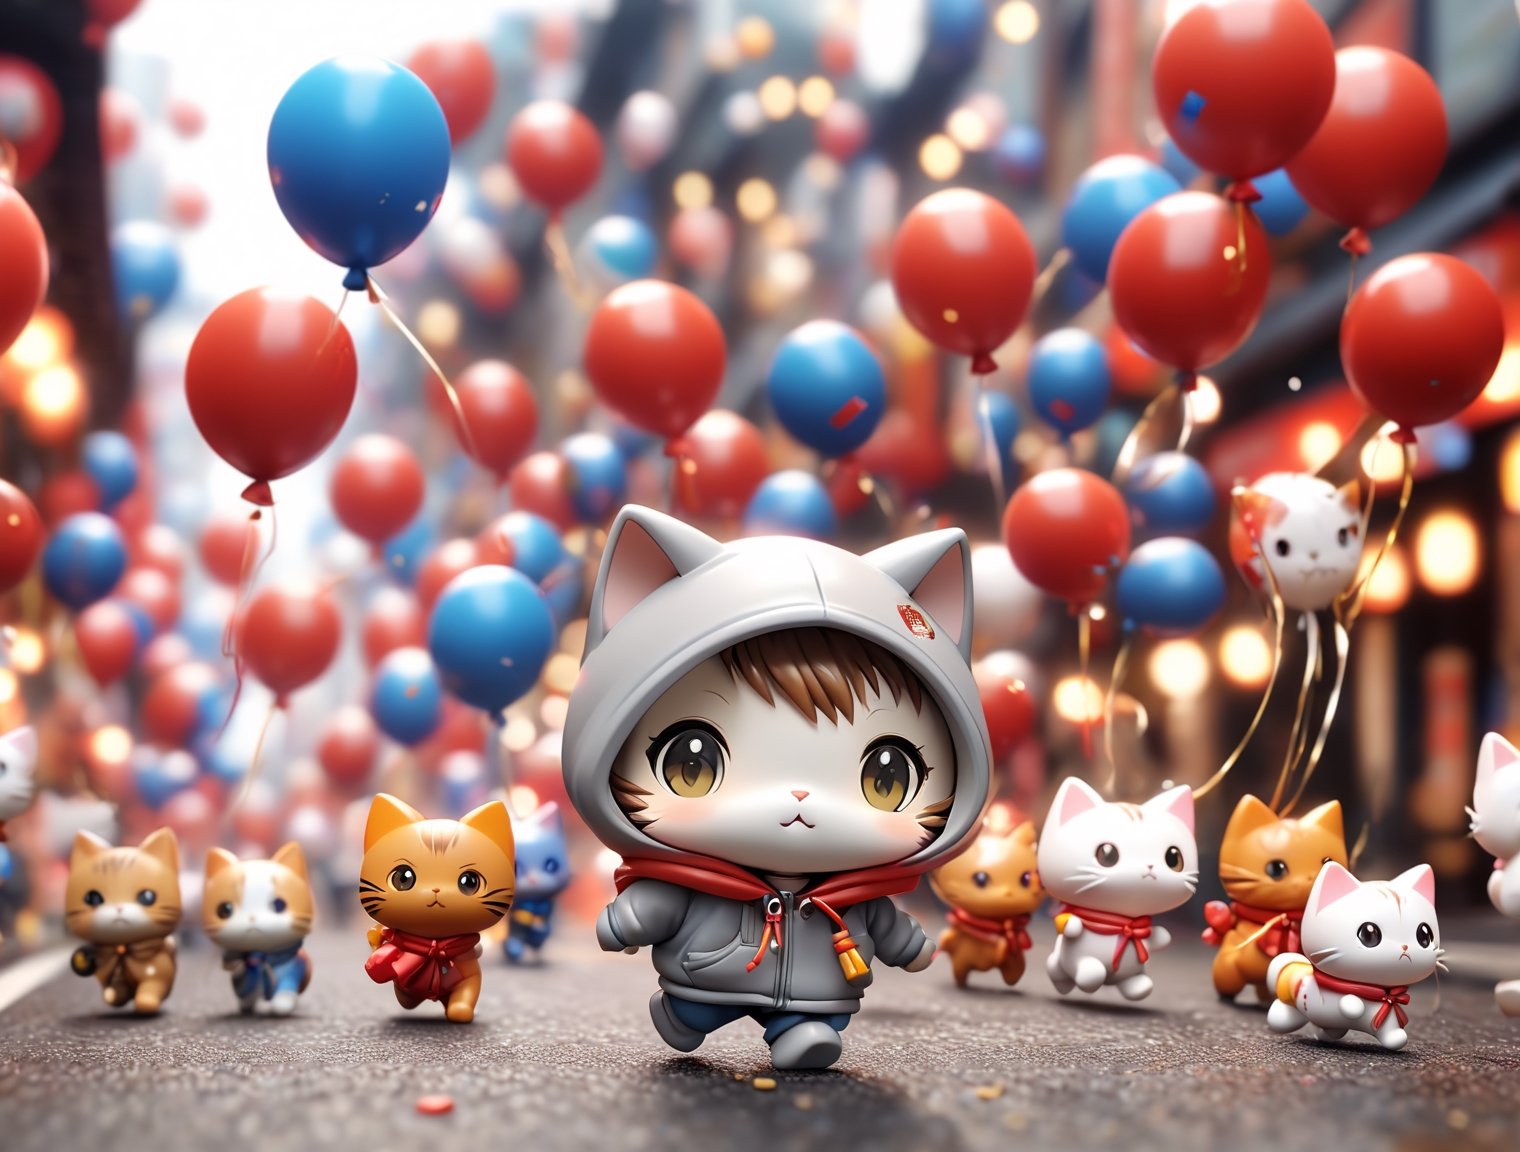 ((chibi style)), chibi cat in hoodie walking on busy street, new year setting, balloon and firecrackers, dynamic angle, depth of field, detail XL, closeup shot, finetune,ghibli,